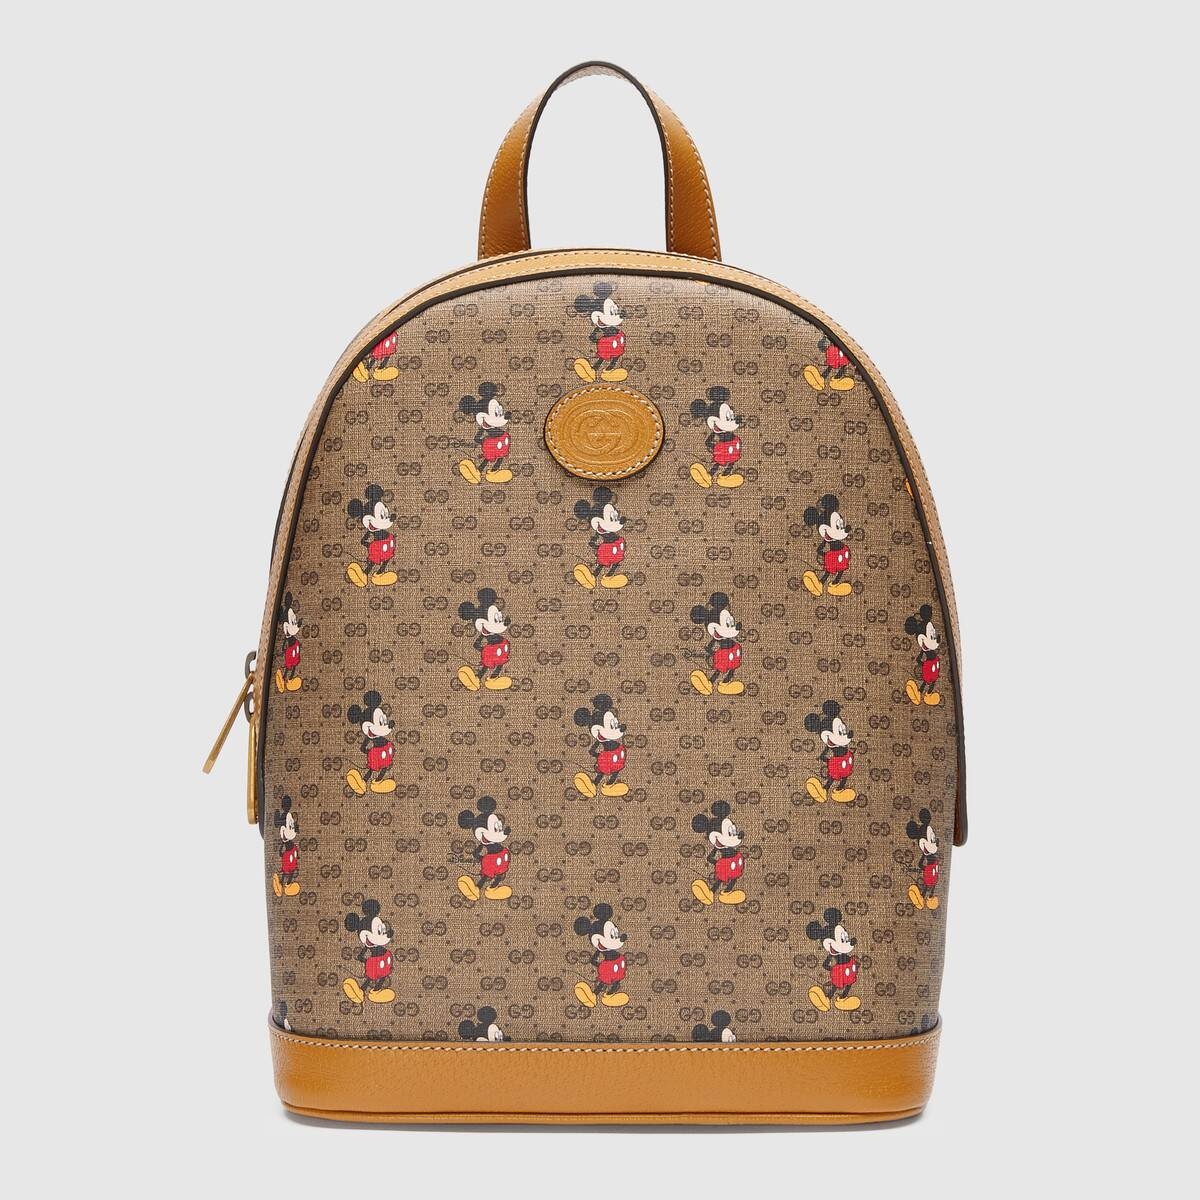 Disney x Gucci small backpack - 1